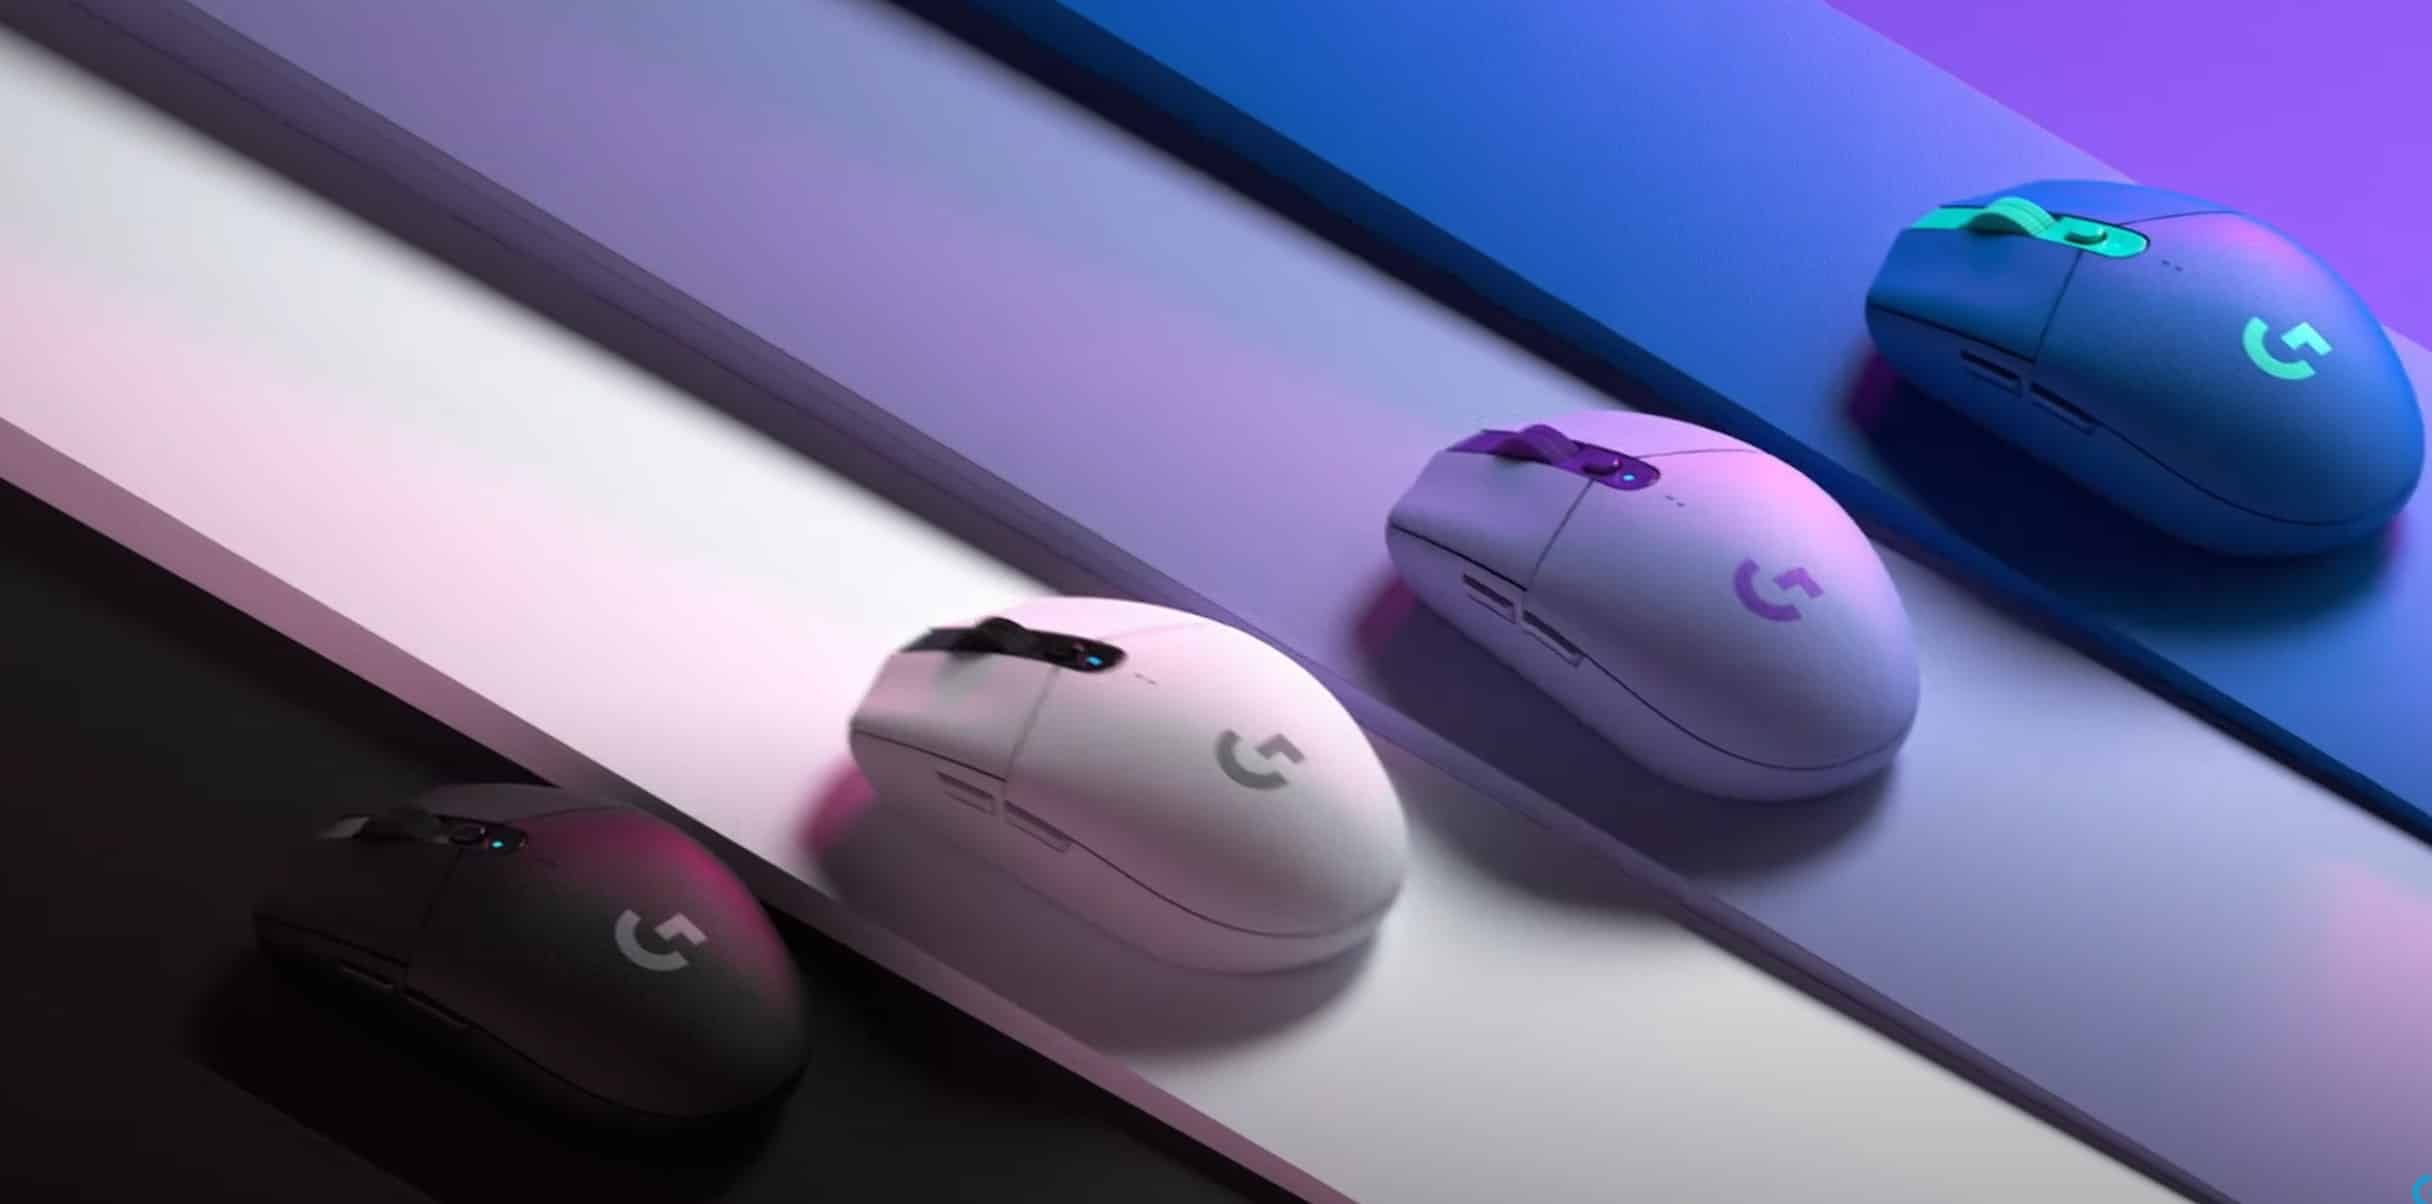 The G305 Lightspeed in different colors